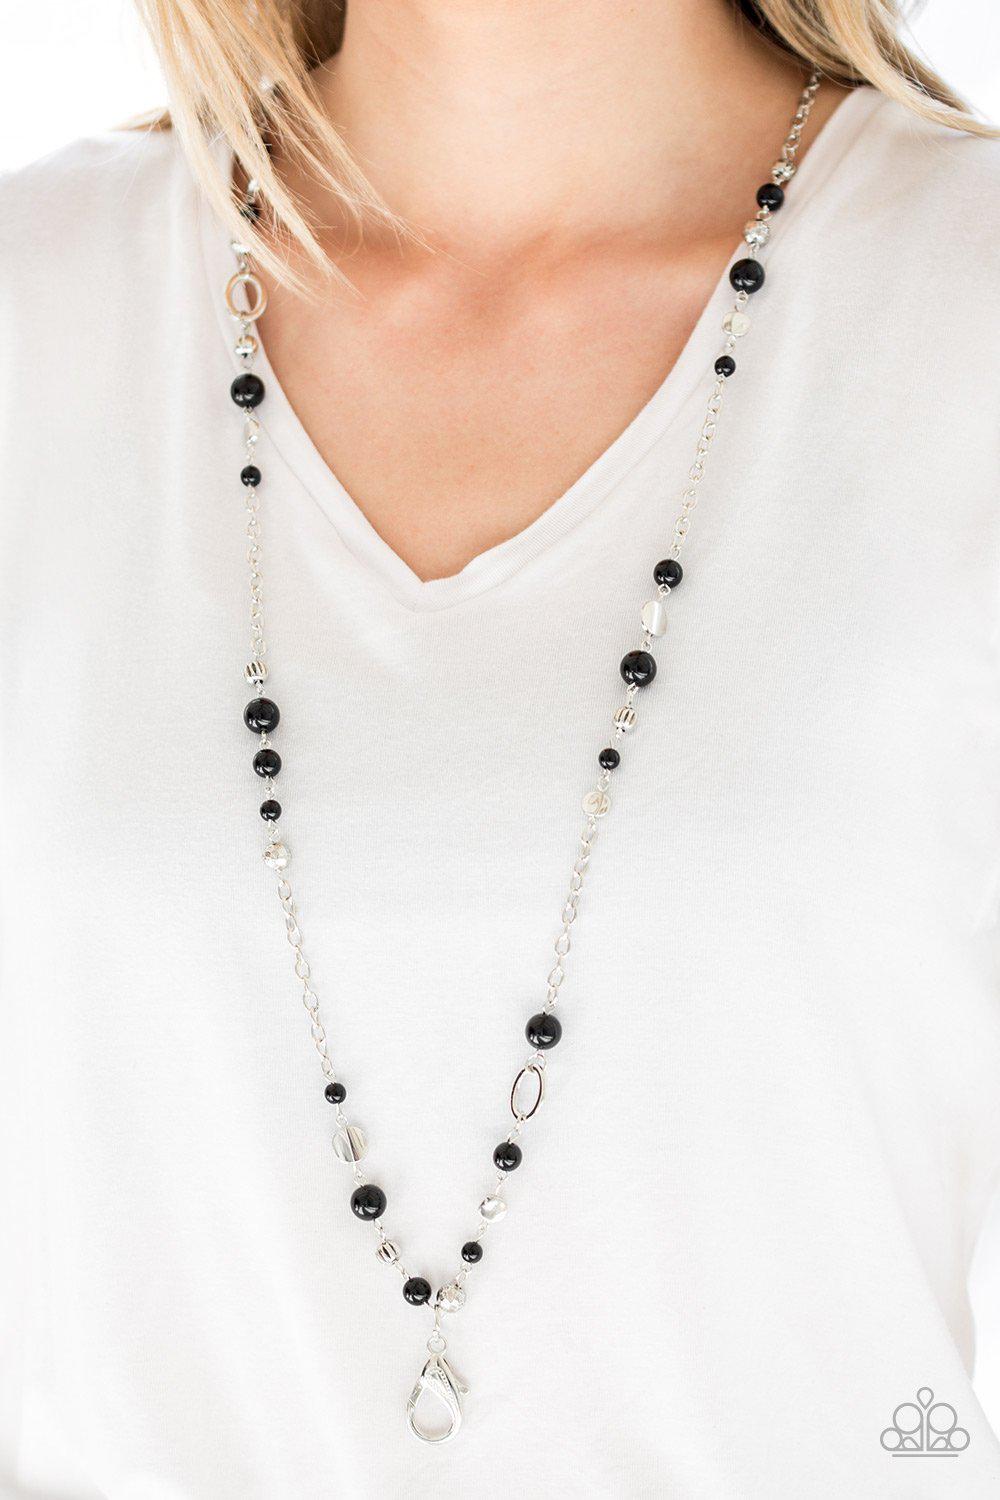 Make An Appearance Black and Silver Lanyard Necklace - Paparazzi Accessories-CarasShop.com - $5 Jewelry by Cara Jewels